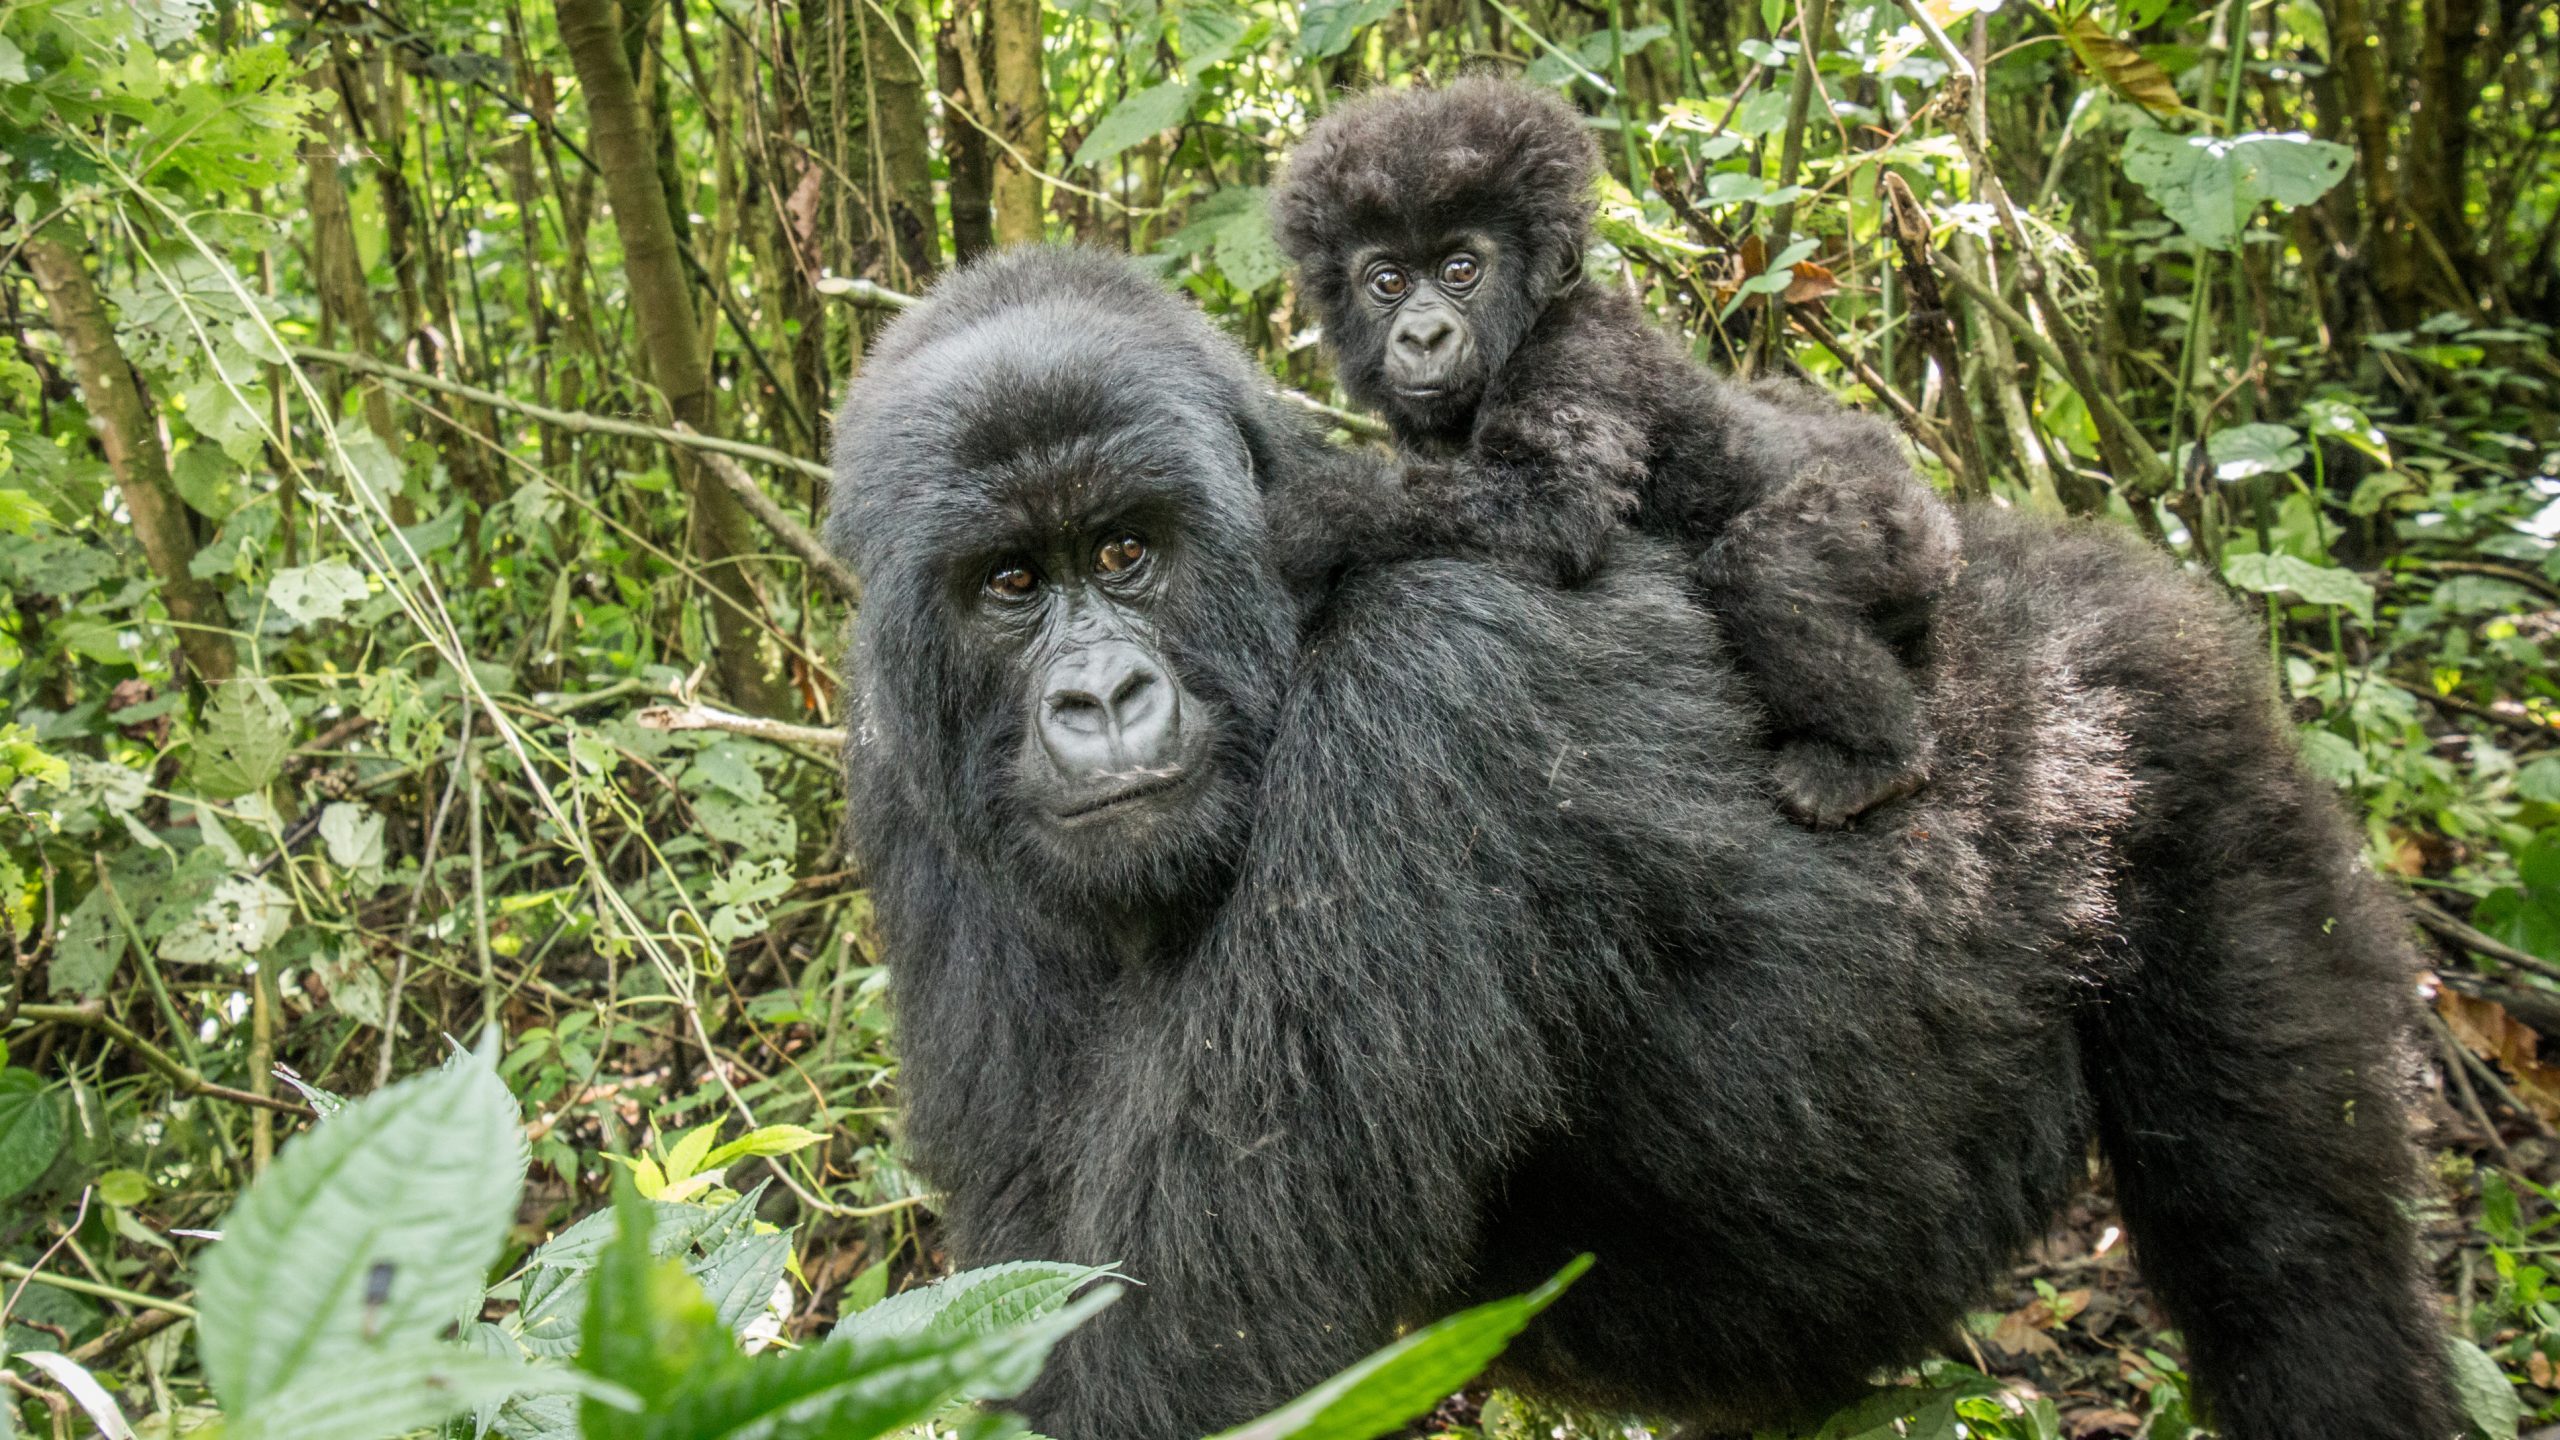 A mountain gorilla with a baby mountain gorilla being carried on its back in the forest